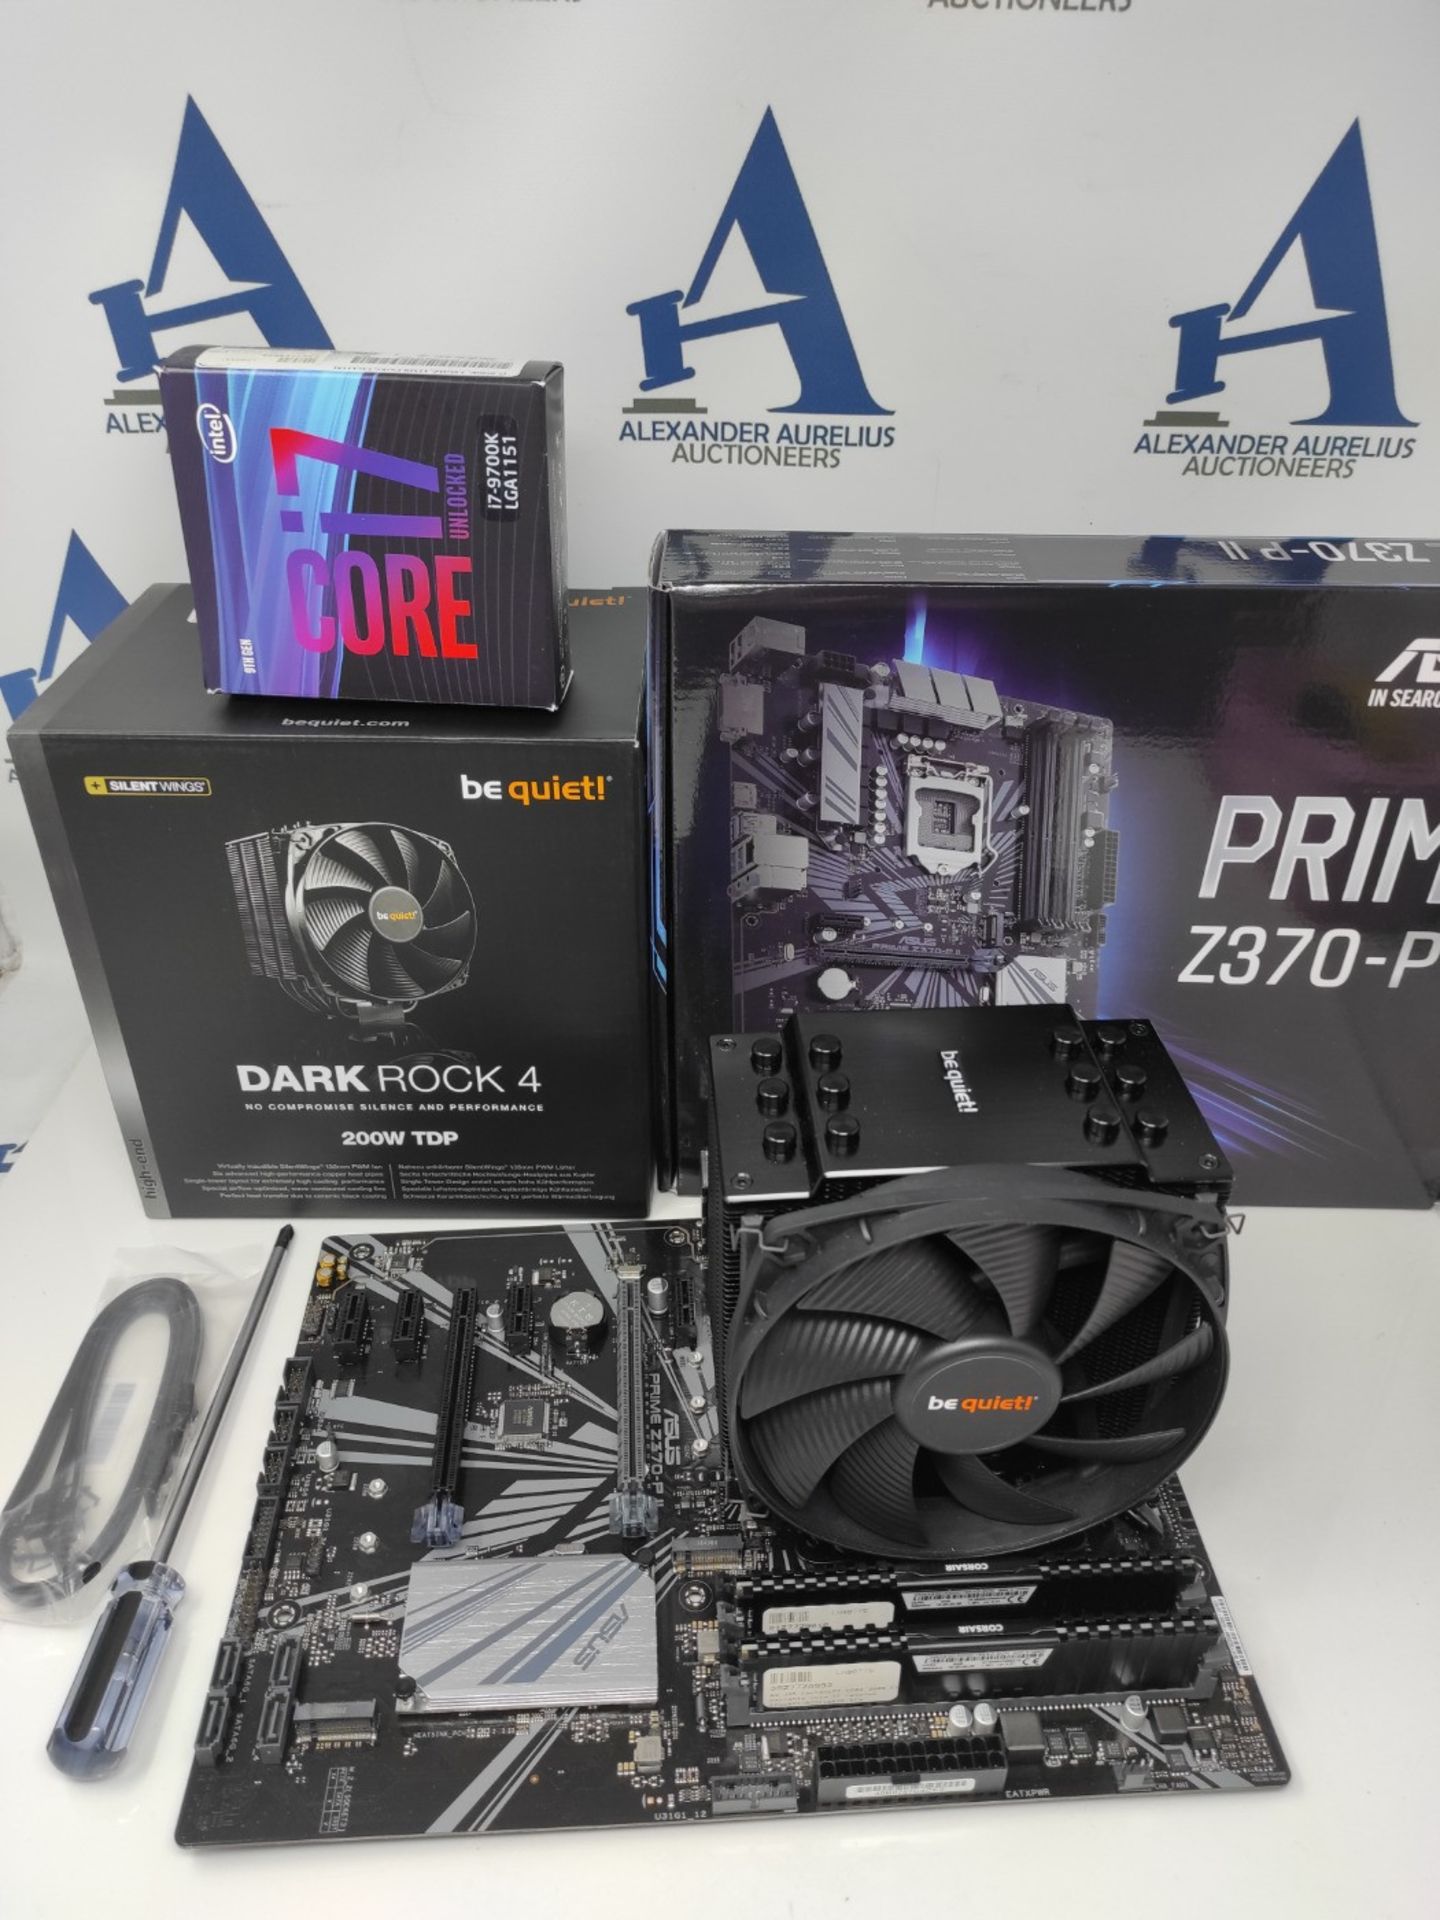 RRP £983.00 Brand New Intel Core i7 9700K "Coffee Lake", Asus Prime Z390-P, 16GB DDR4, Be QUIET! D - Image 2 of 3